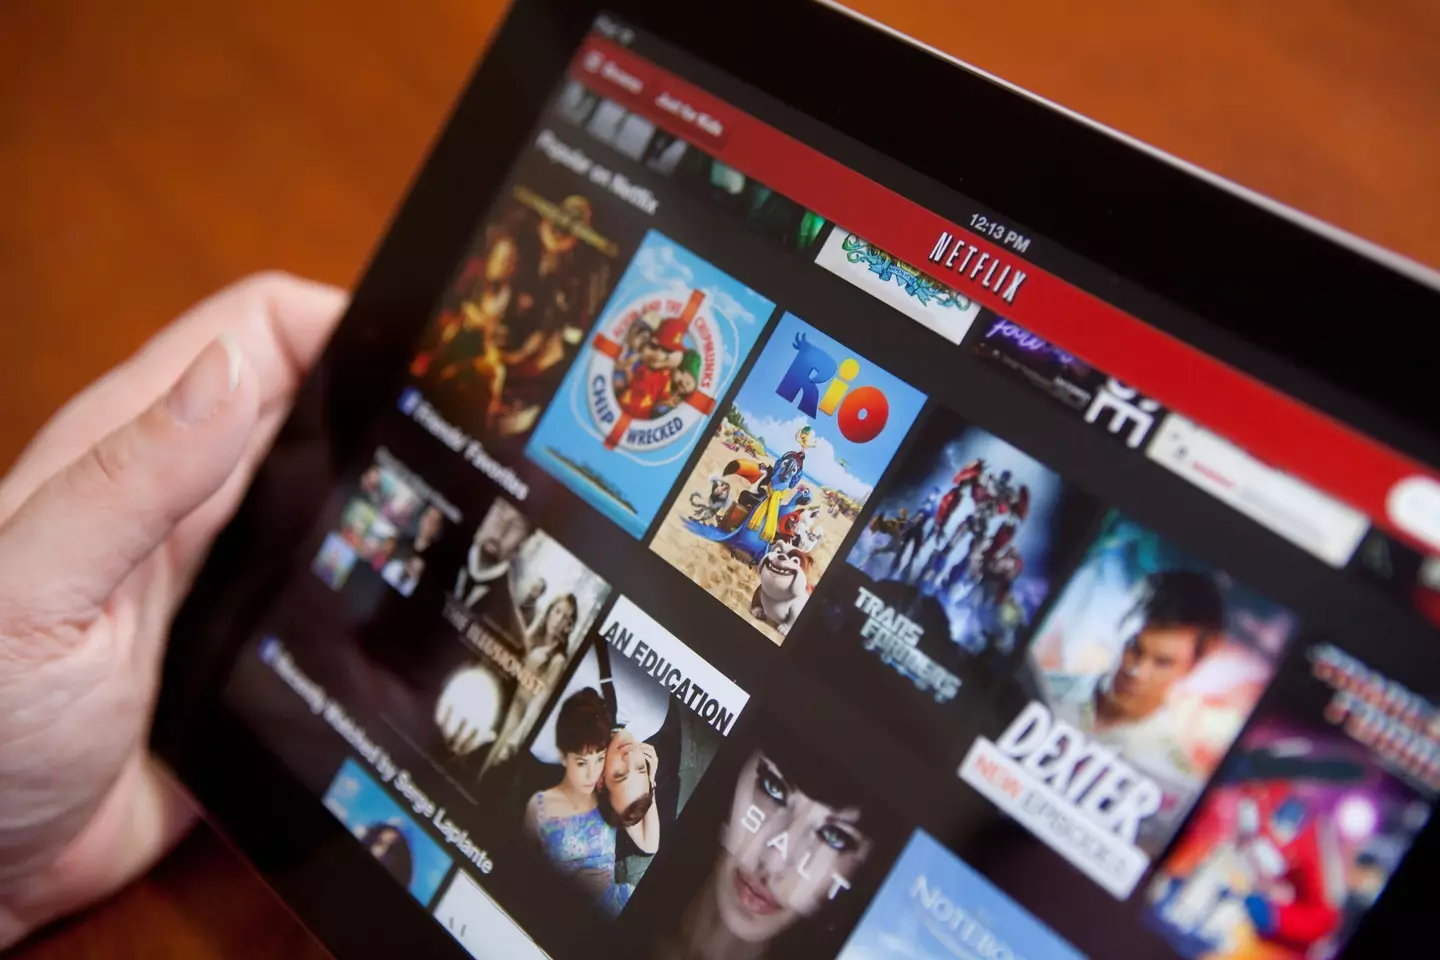 It's reported that Netflix are looking at other possible subscription options for customers.